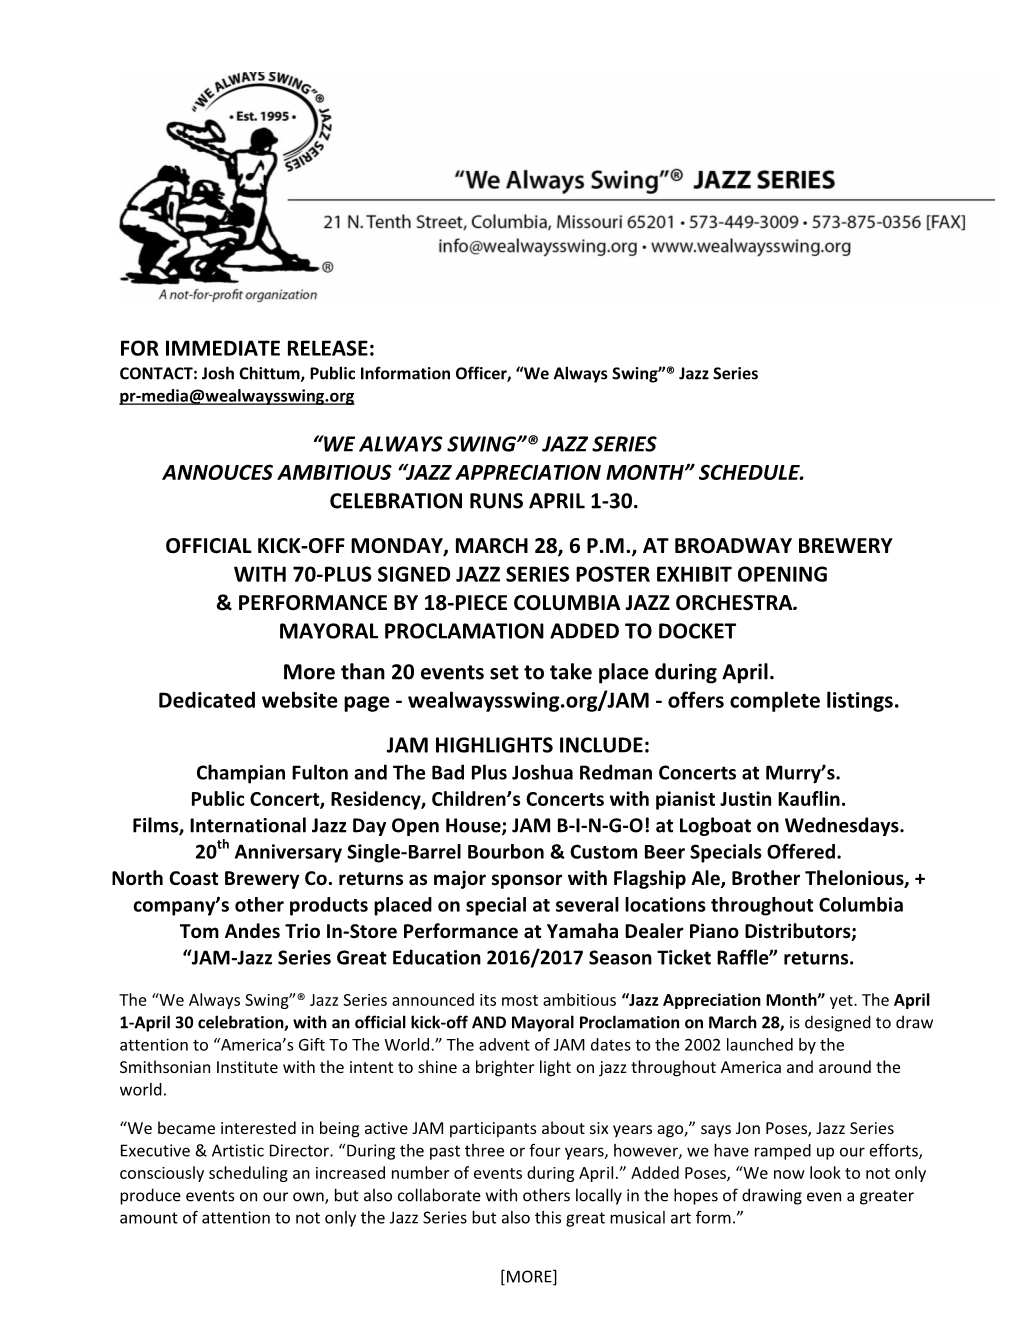 For Immediate Release: “We Always Swing”® Jazz Series Annouces Ambitious “Jazz Appreciation Month” Schedule. Celebratio